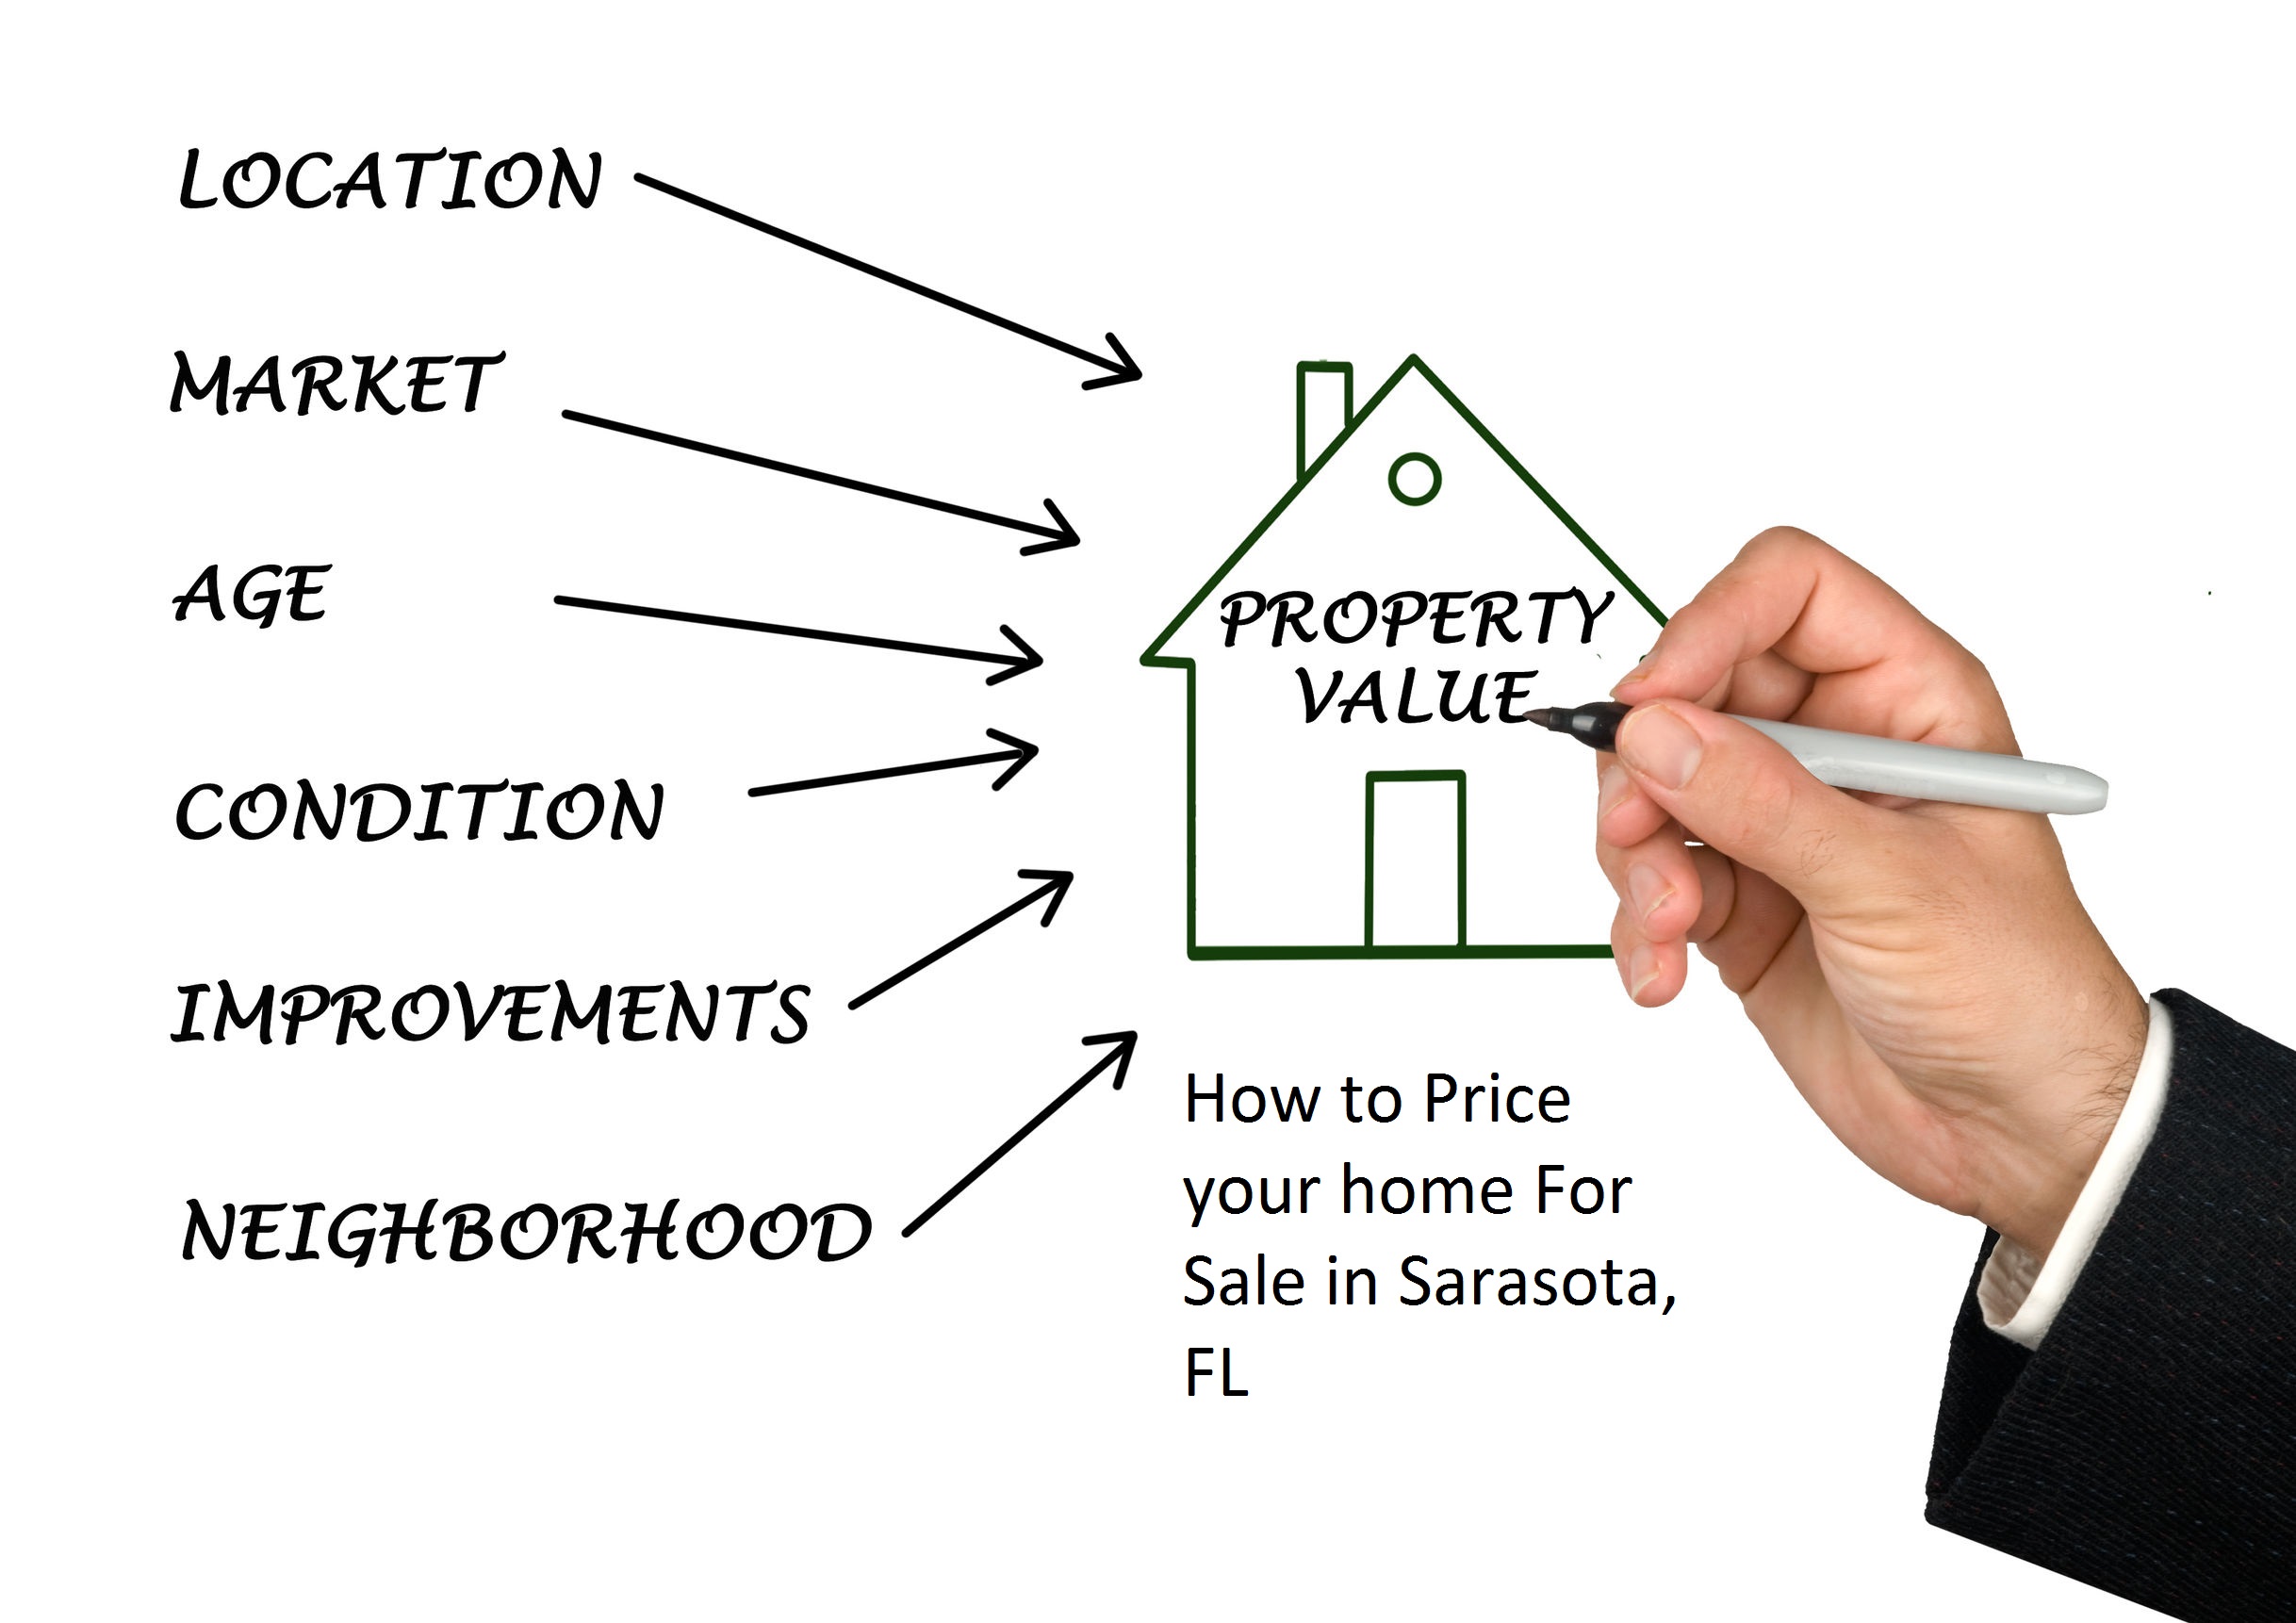 Guide On How To Price Your Home For Sale in Sarasota, FL